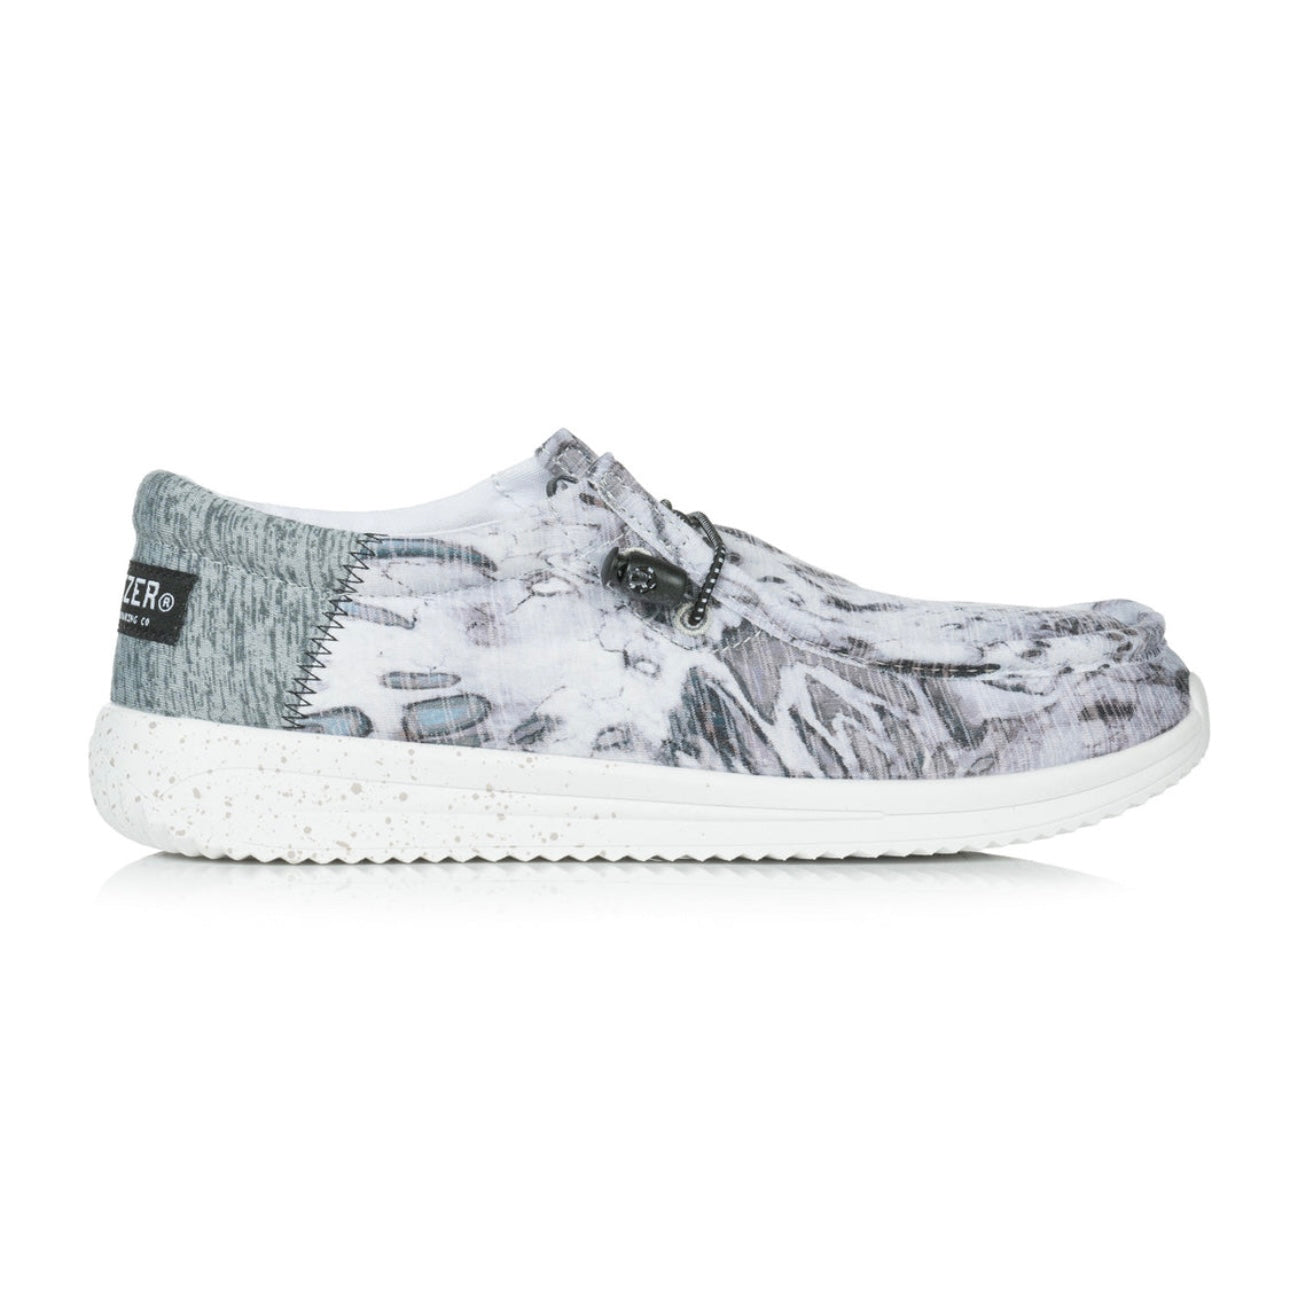 Howitzer Silver Mist White Slip-on Shoes